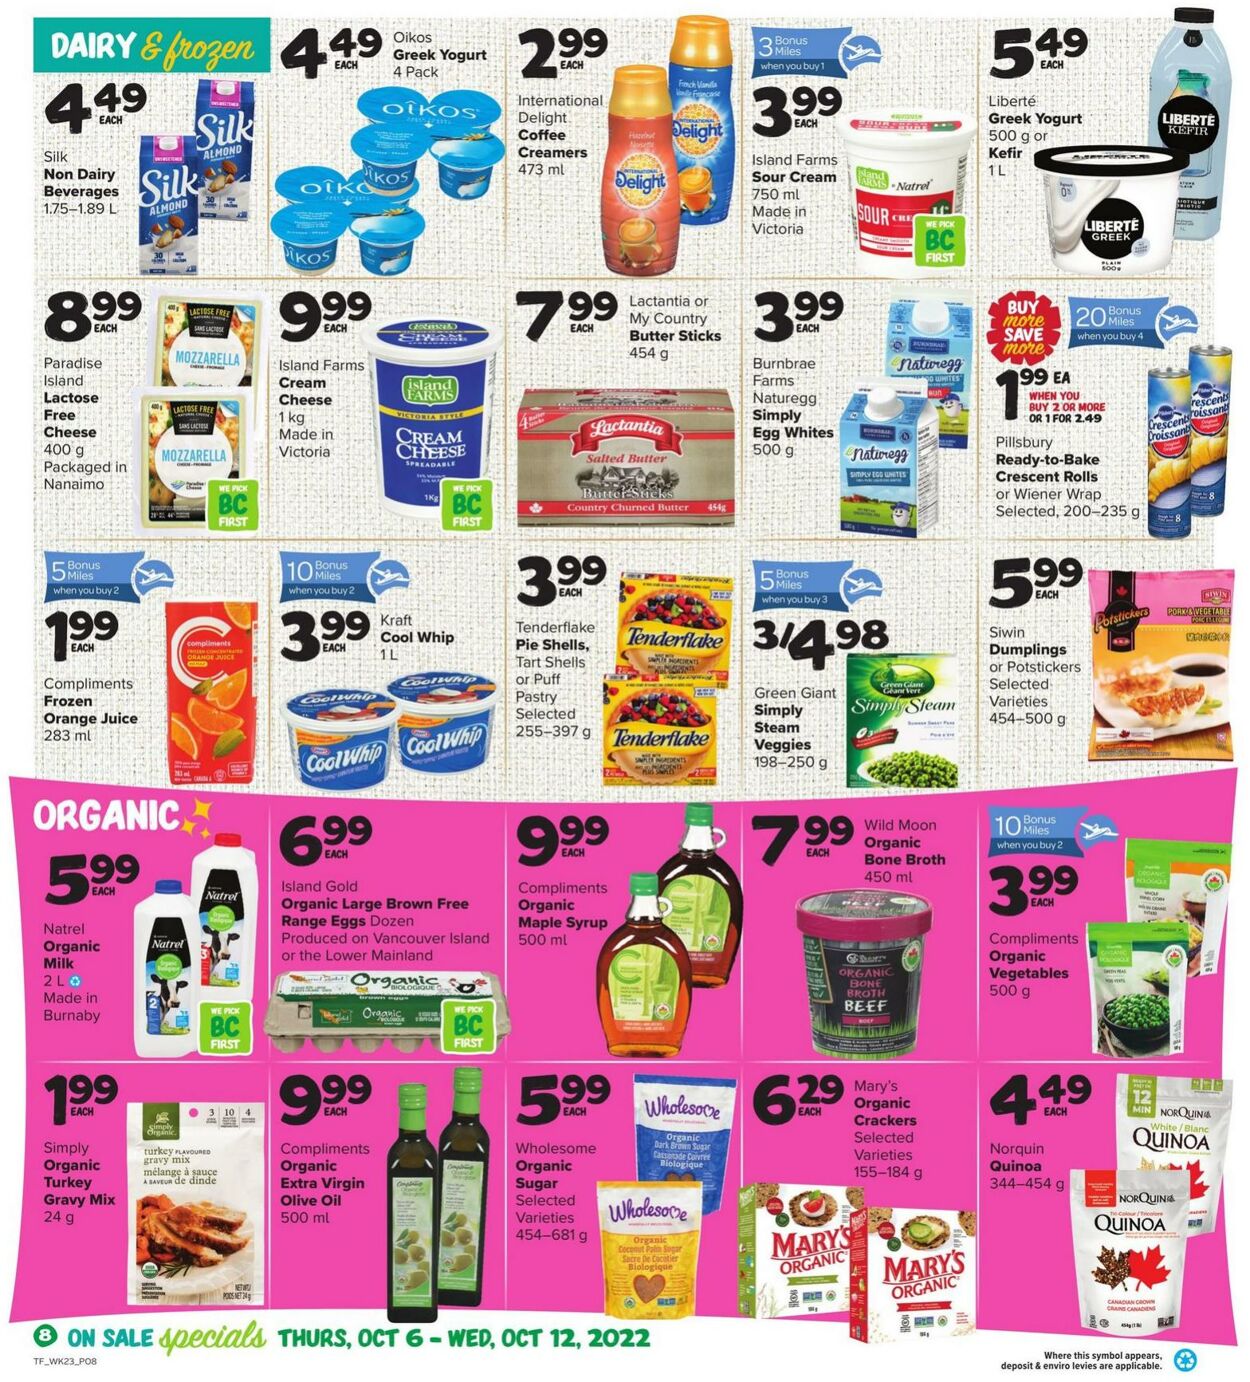 Circulaire Thrifty Foods 06.10.2022 - 12.10.2022